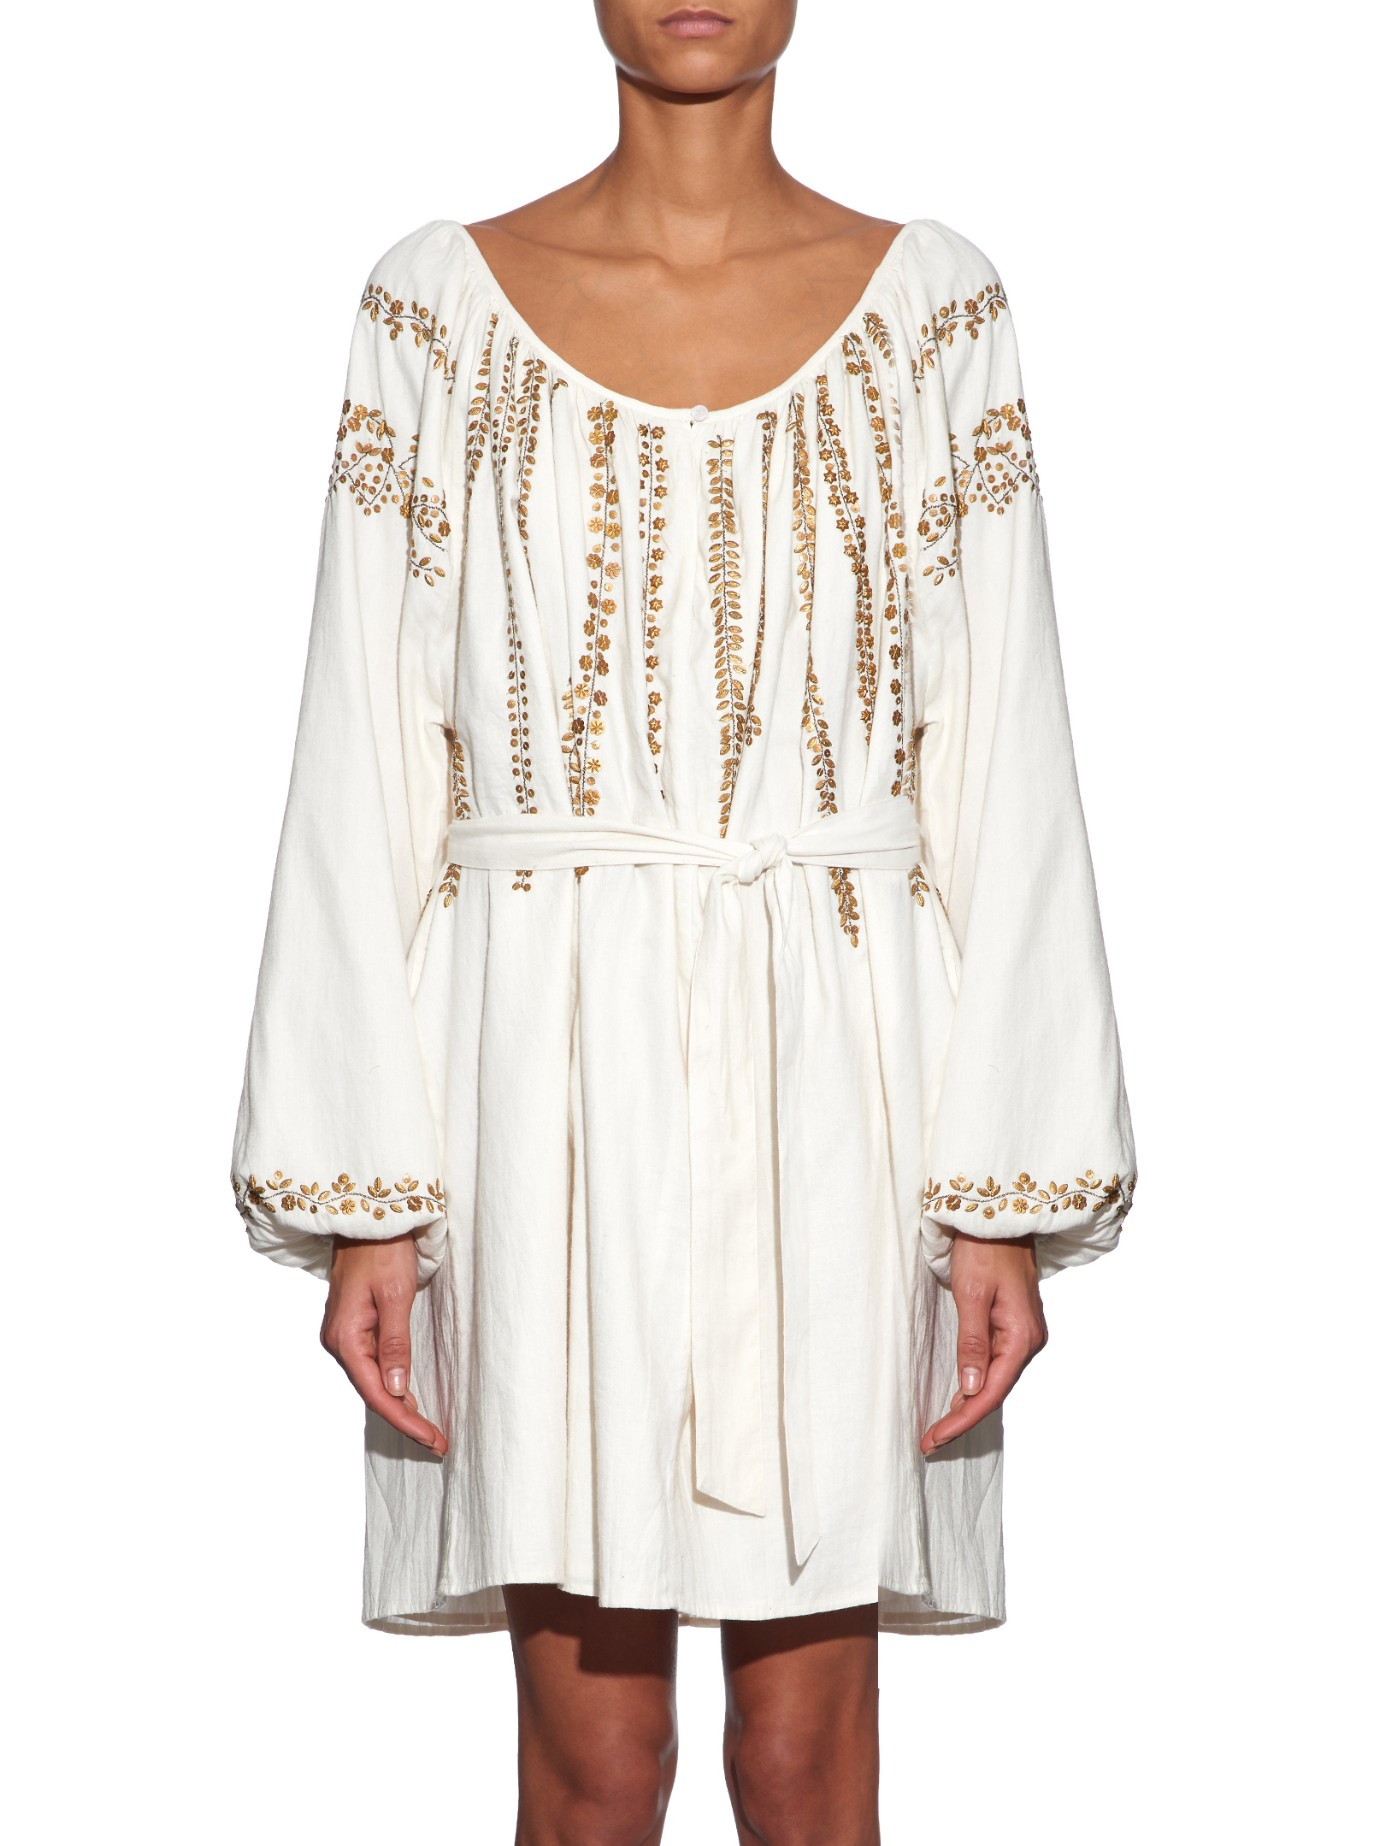 Lyst - Mes Demoiselles Sarina Embellished Cotton Dress in Natural